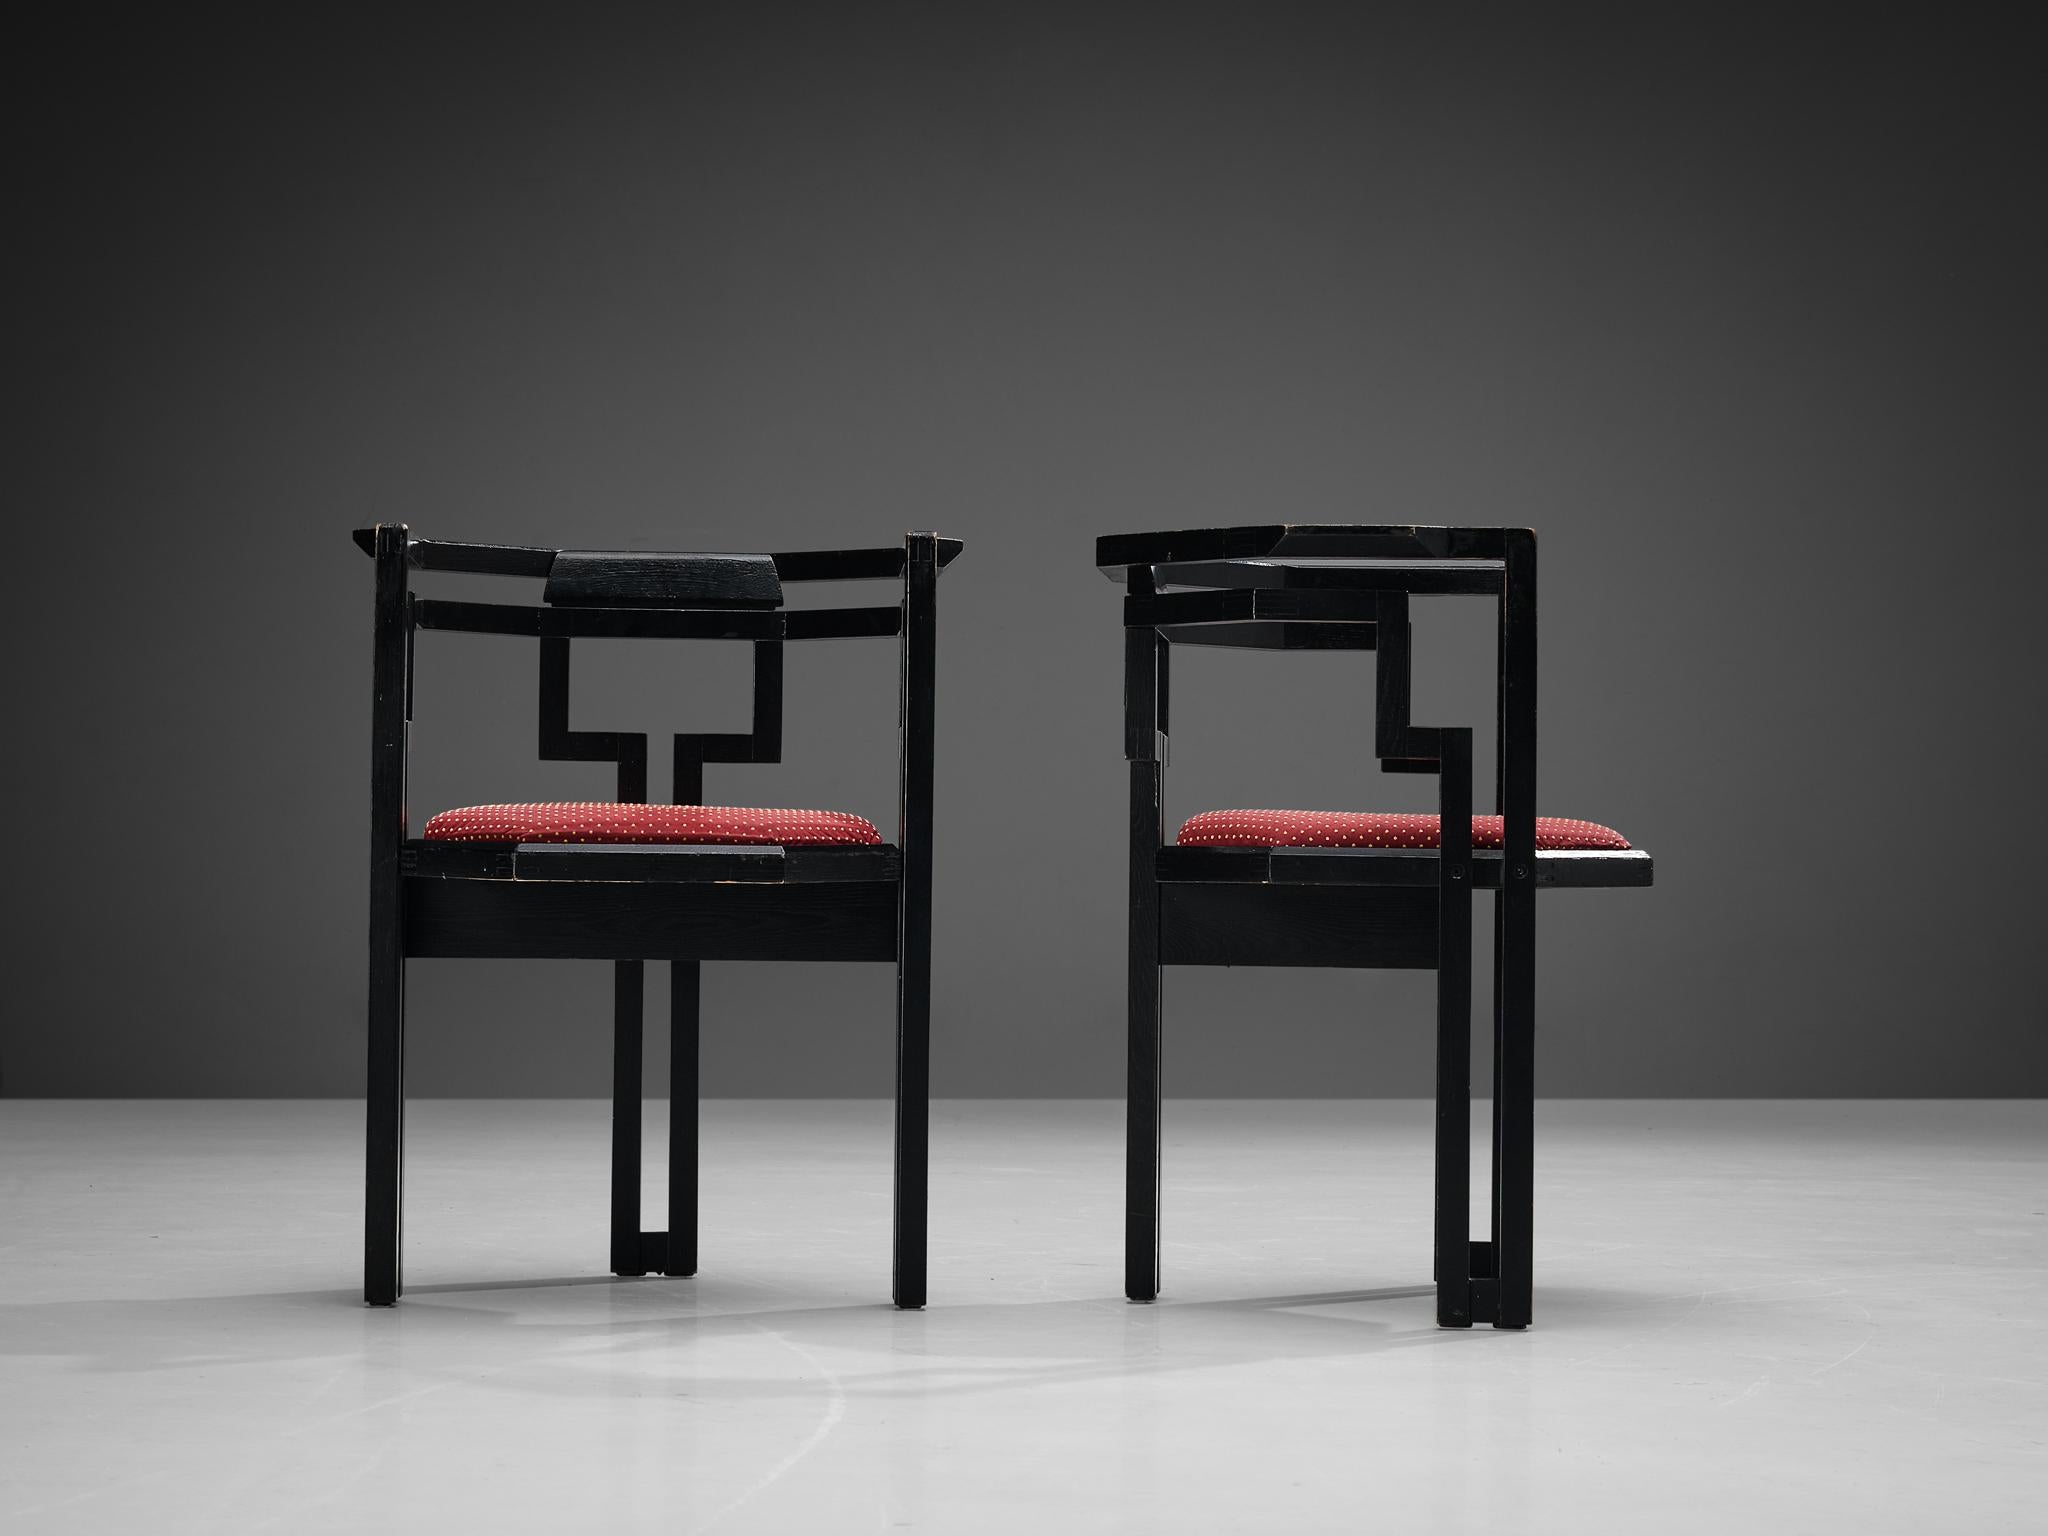 Pair of dining chairs, black lacquered oak, fabric, Italy, 1970s

Outstanding pair of geometrical Italian dining chairs. These chairs combine a sculptural design that is simple, but very strong in lines and proportions with a luxurious feeling